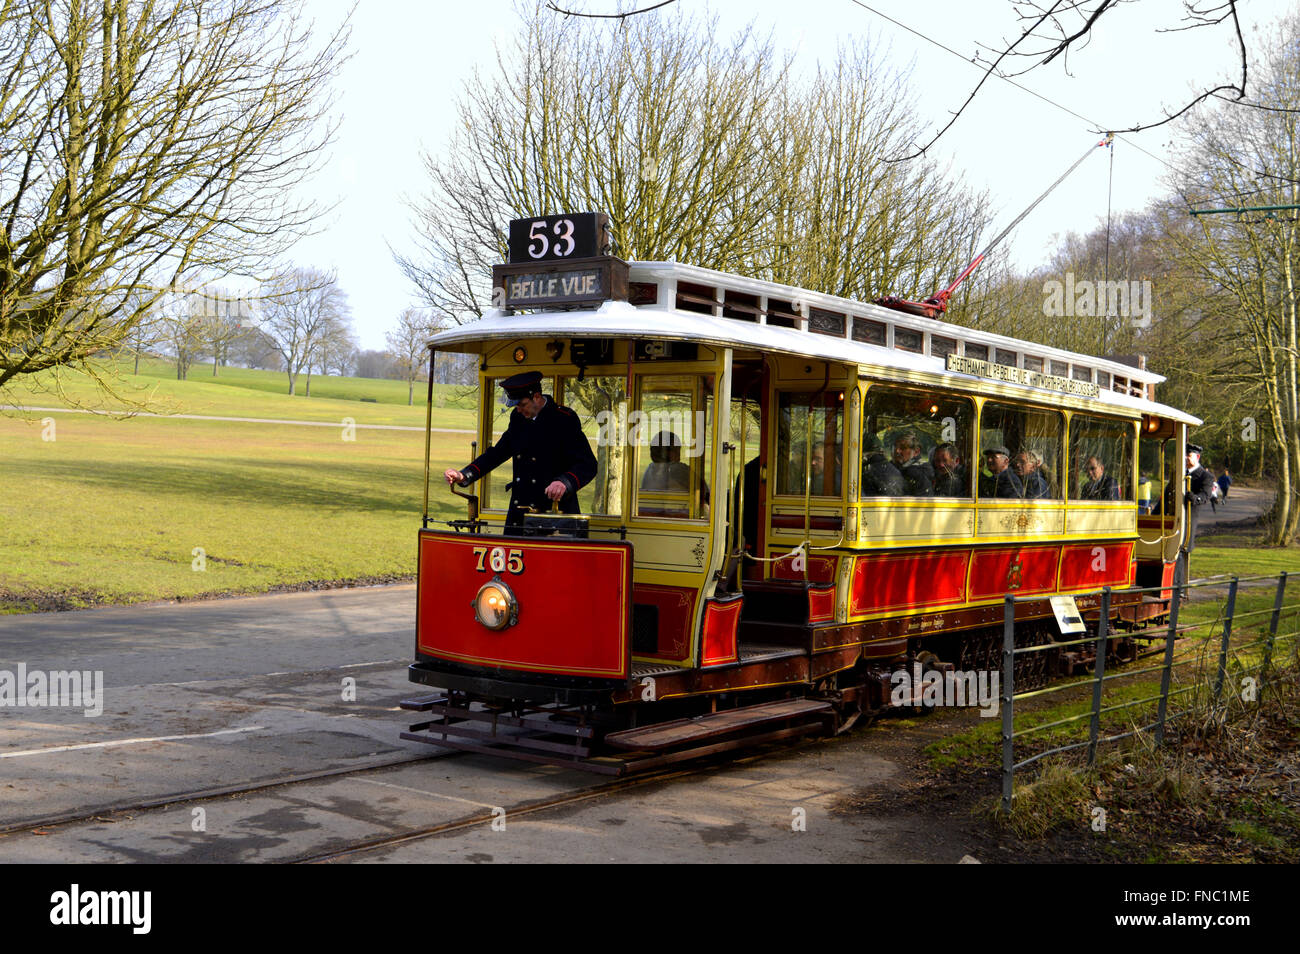 Tram number 765 being driven in Heaton Park. Stock Photo